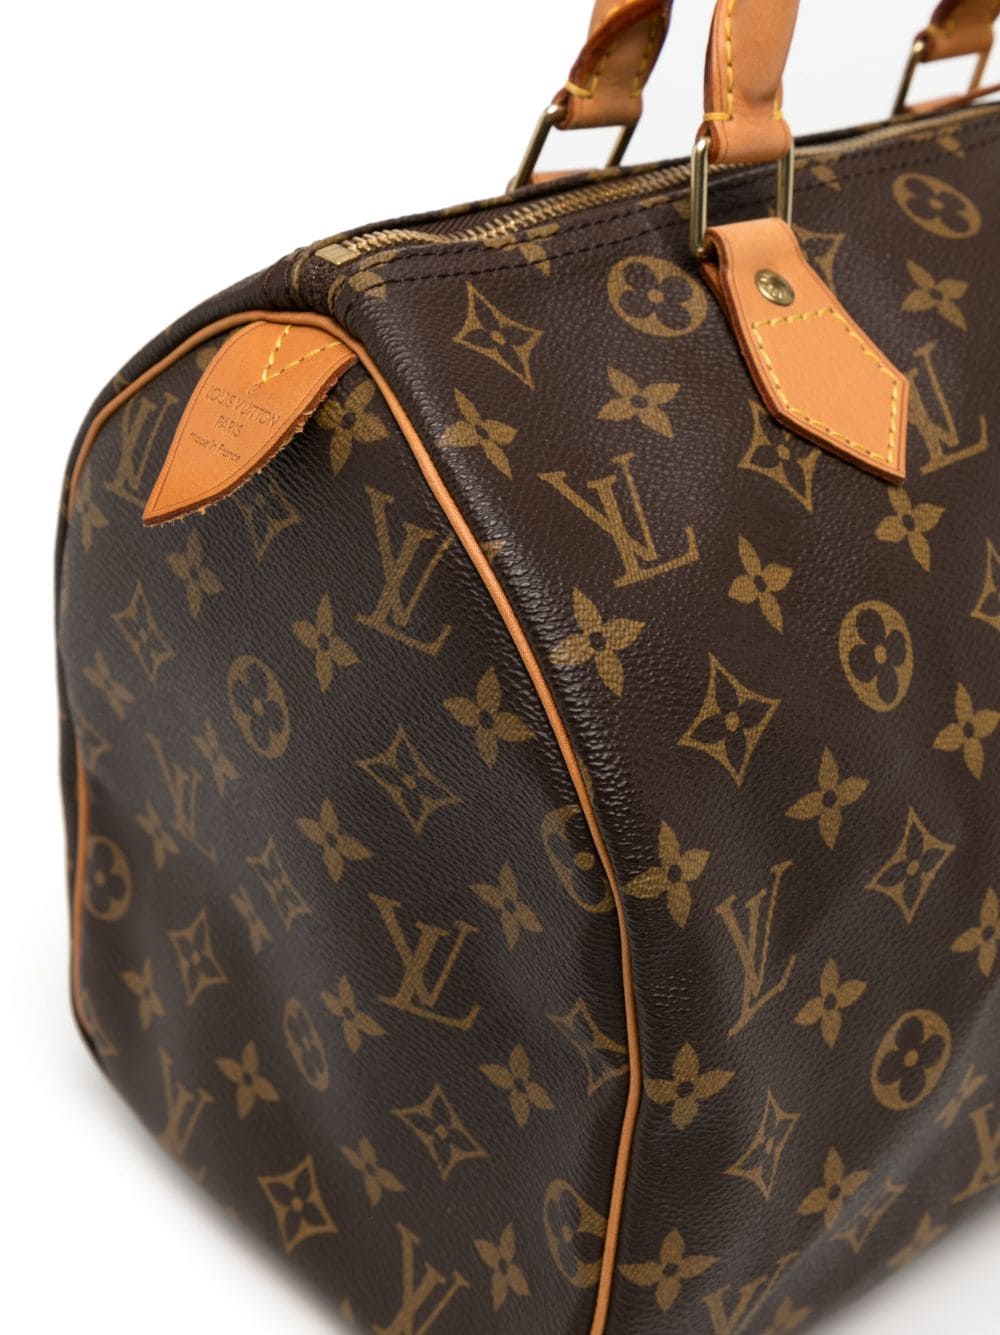 Louis Vuitton Pre-Loved Speedy 30 bag for Women - Multicolored in